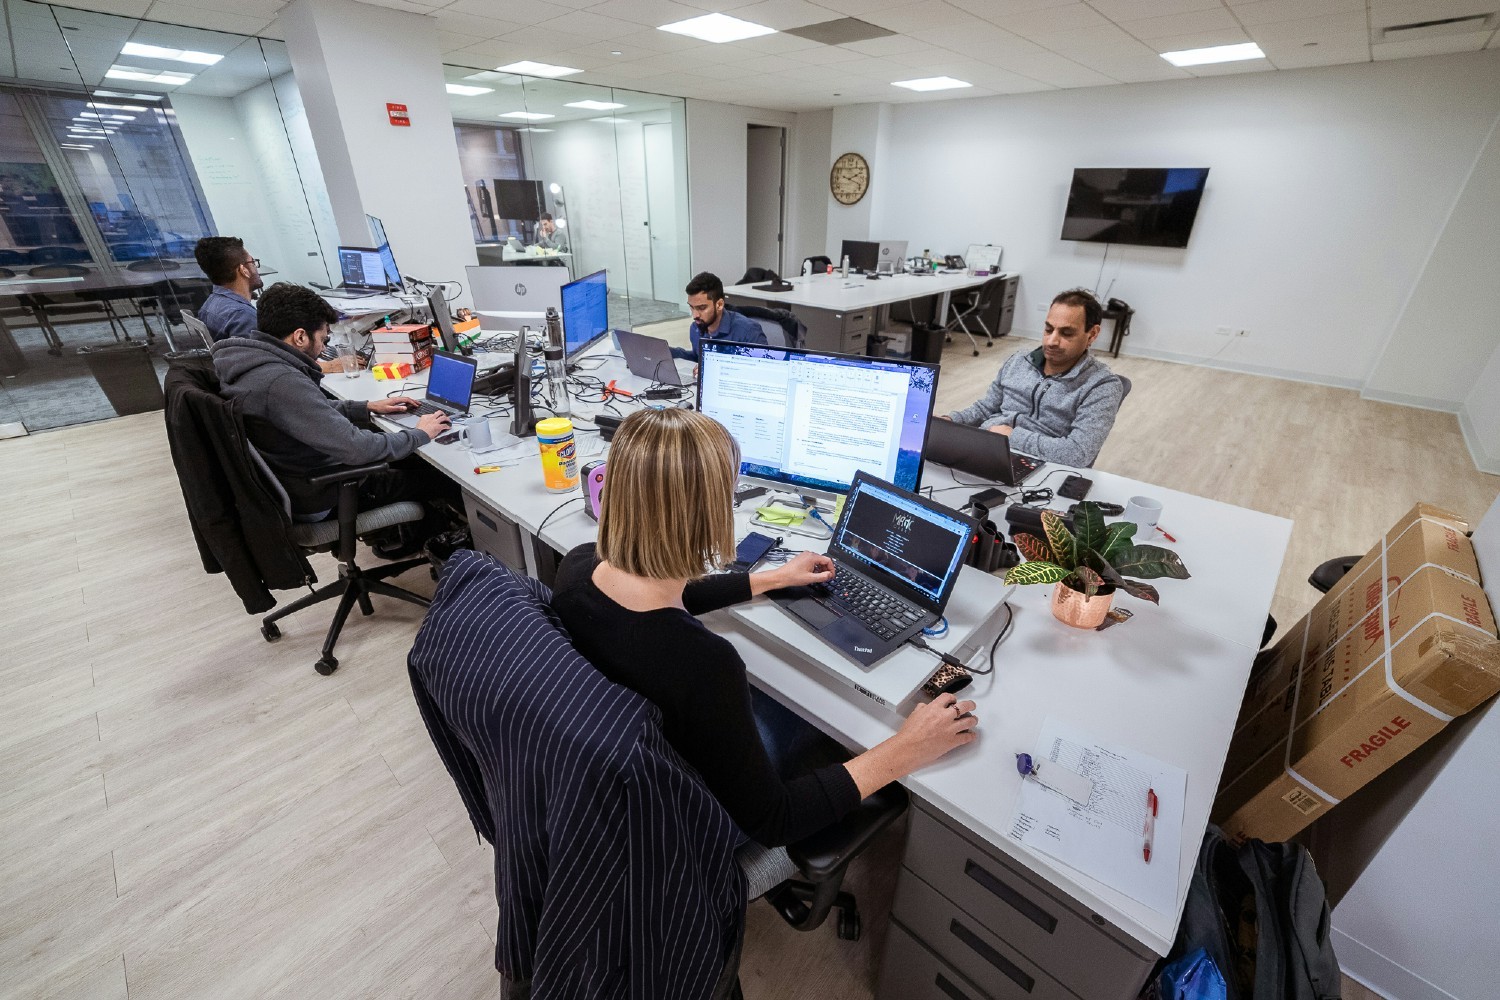 EKI-Digital has an open floor plan allowing employees to work cohesively together.